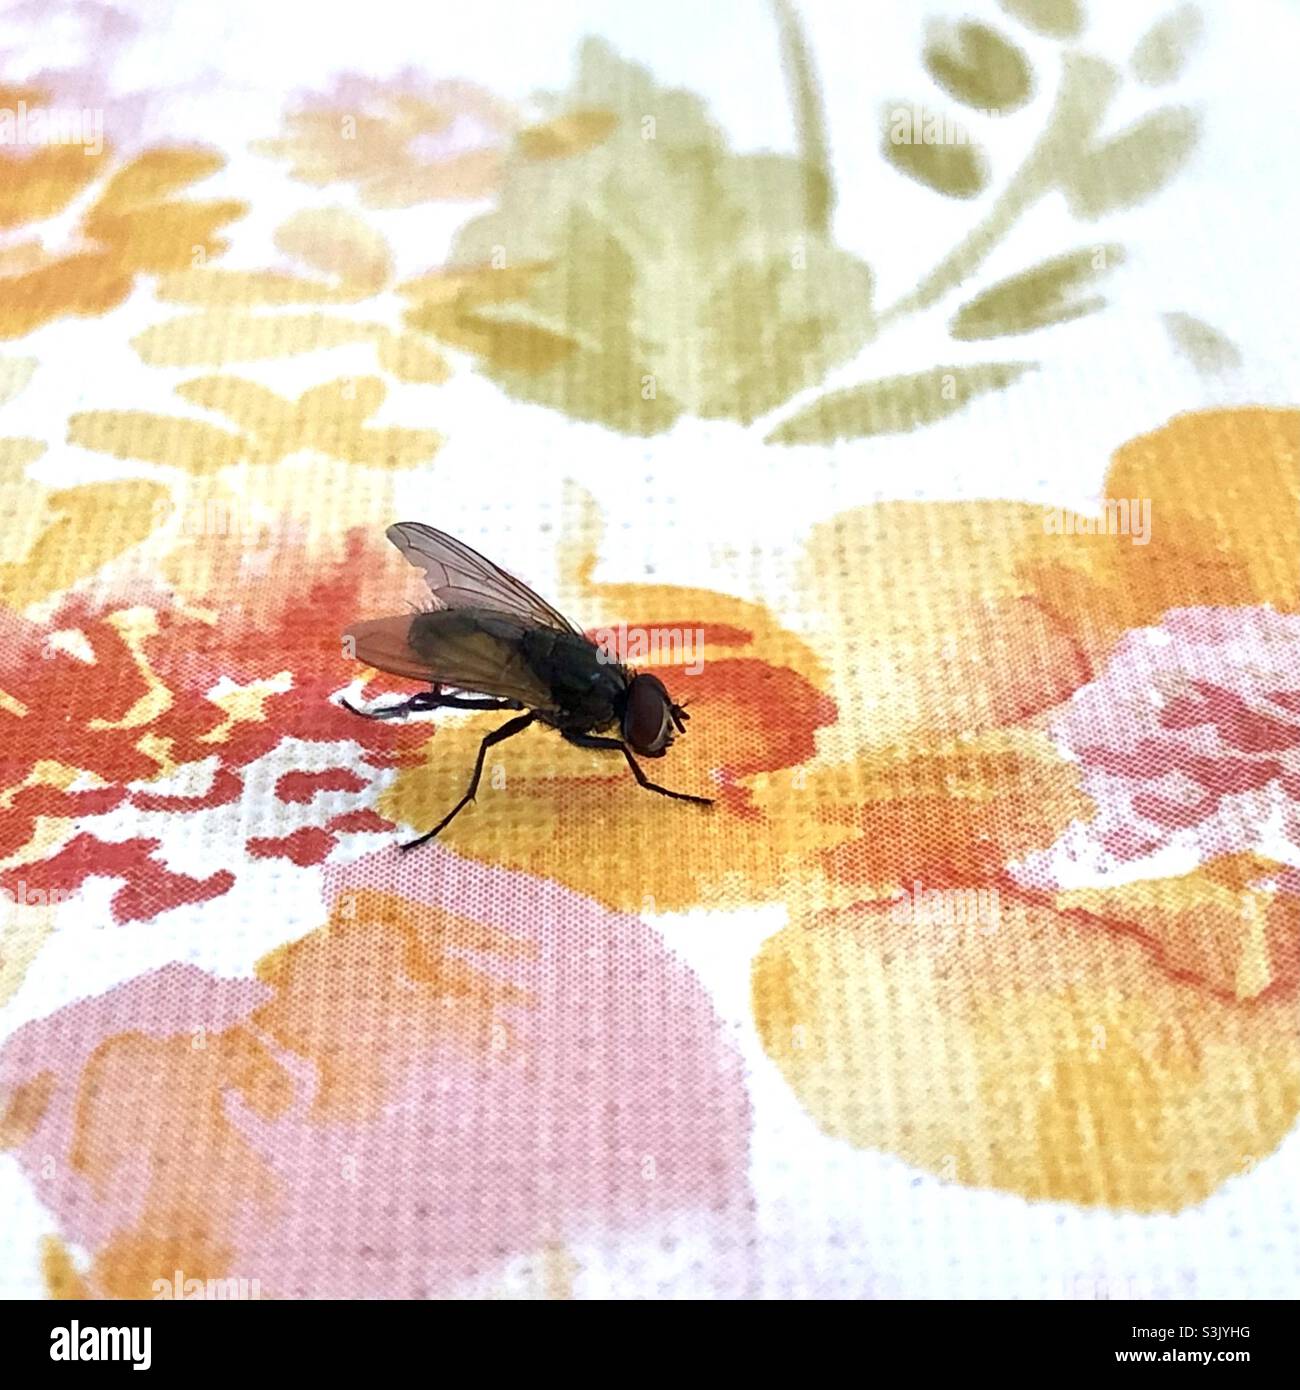 Fly on table flowered cloth flower Stock Photo